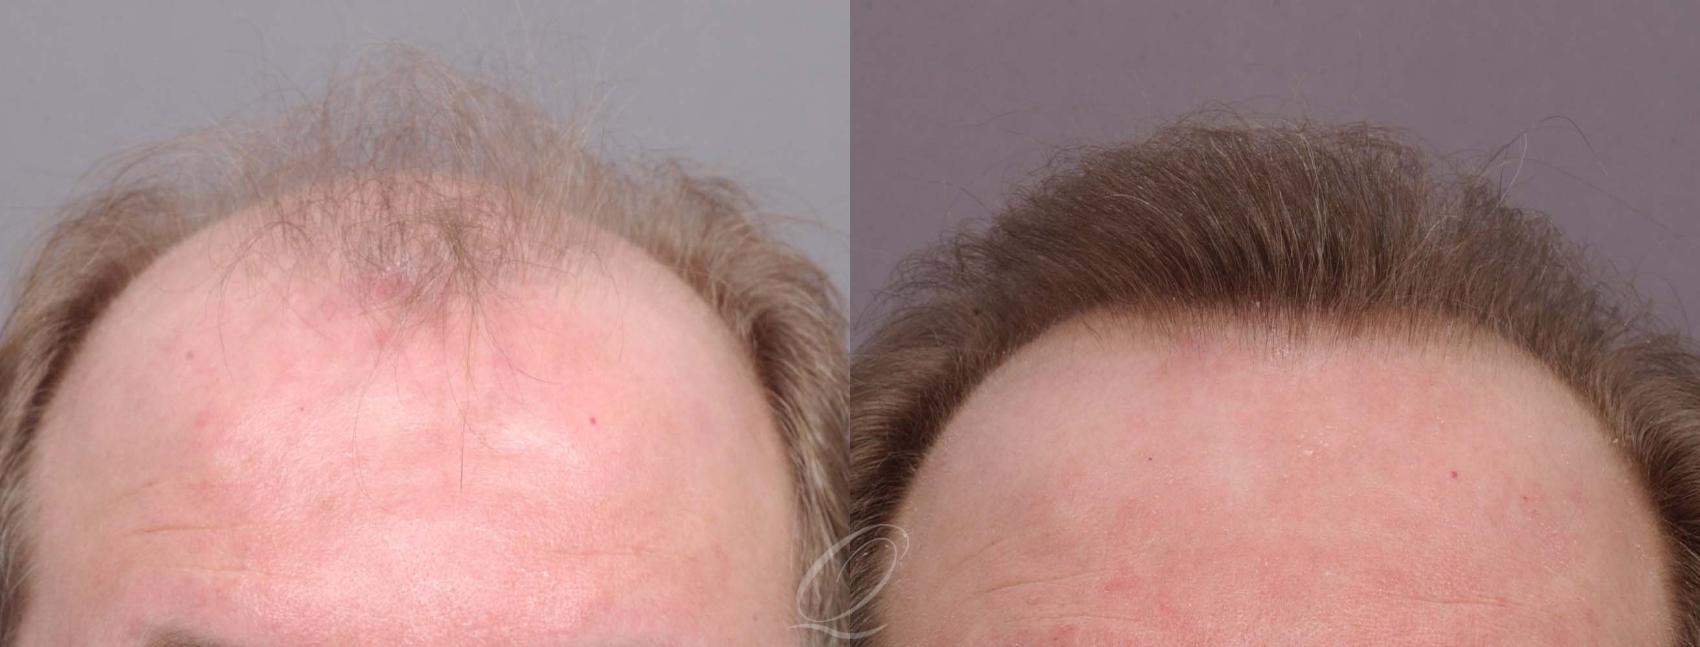 FUT Case 1034 Before & After View #1 | Rochester, Buffalo, & Syracuse, NY | Quatela Center for Hair Restoration